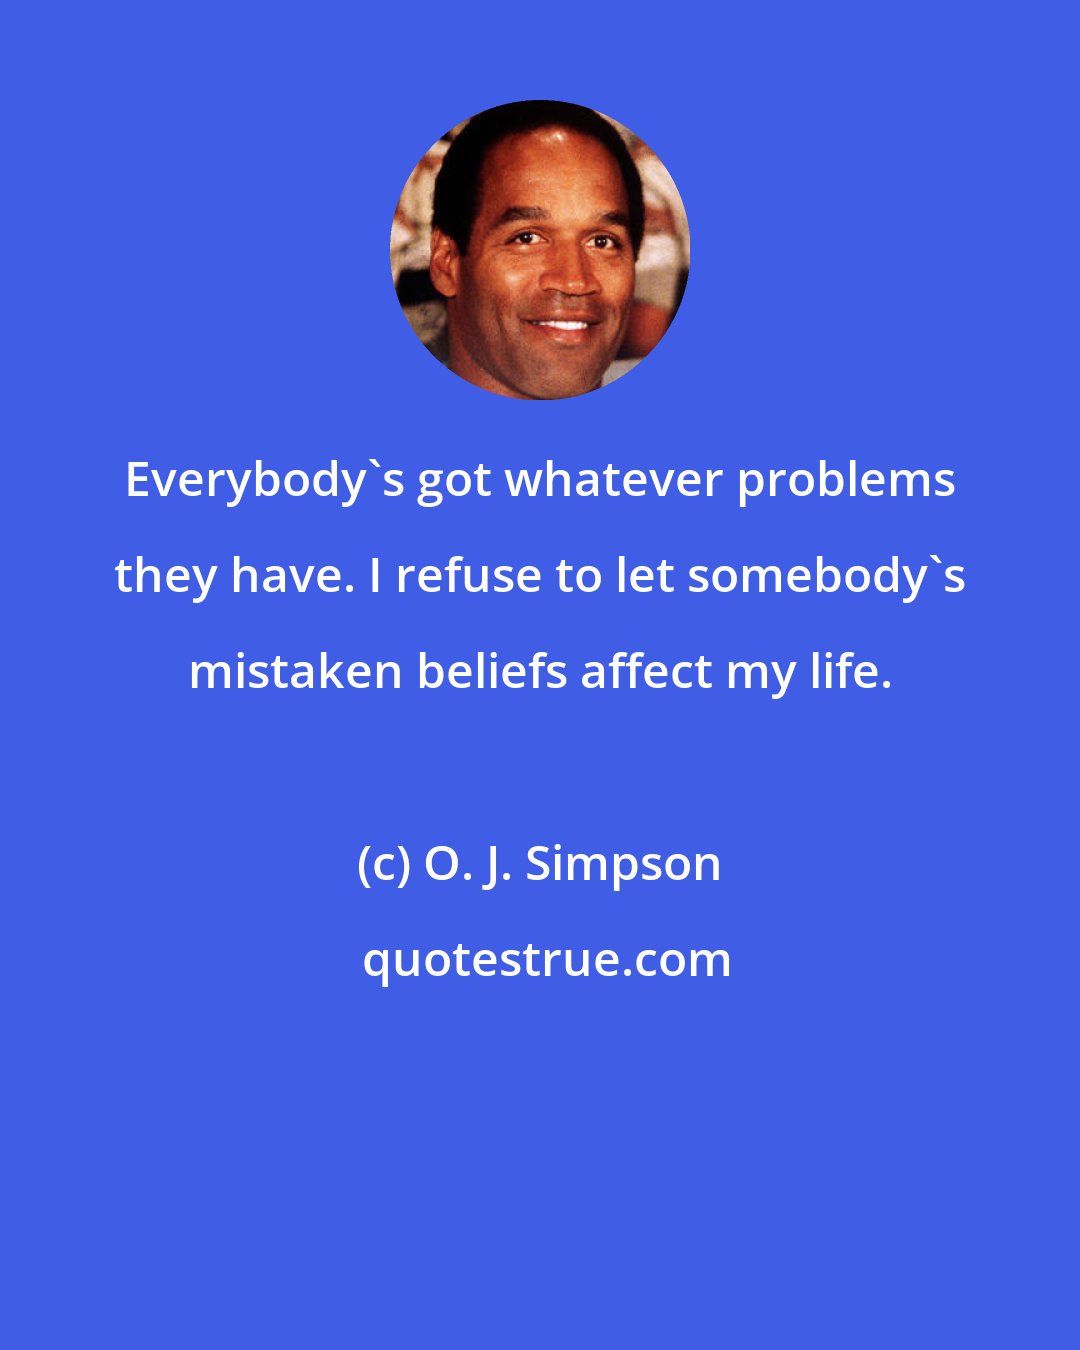 O. J. Simpson: Everybody's got whatever problems they have. I refuse to let somebody's mistaken beliefs affect my life.